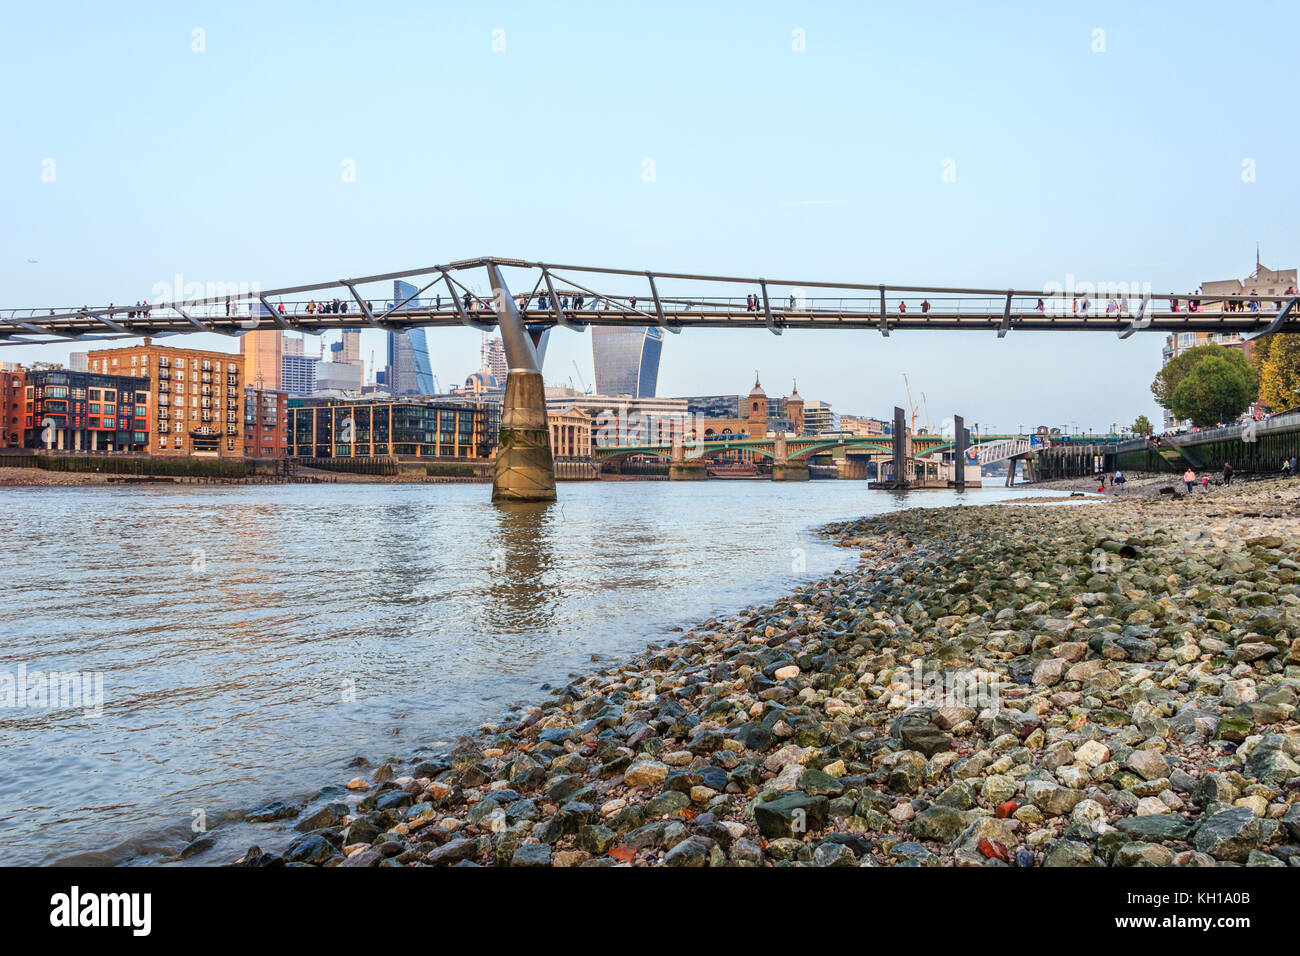 The Millennium Bridge, London, UK, seen from the Thames foreshore at Bankside, at low tide on an autumn evening Stock Photo